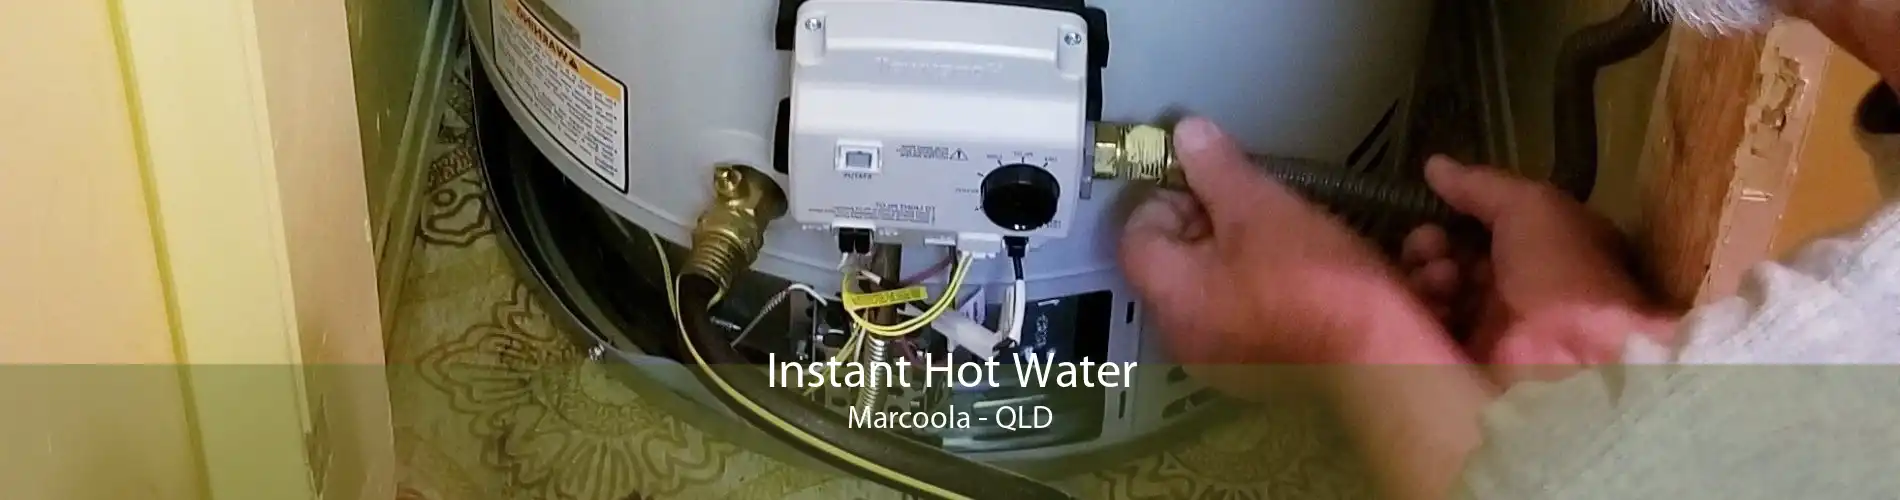 Instant Hot Water Marcoola - QLD